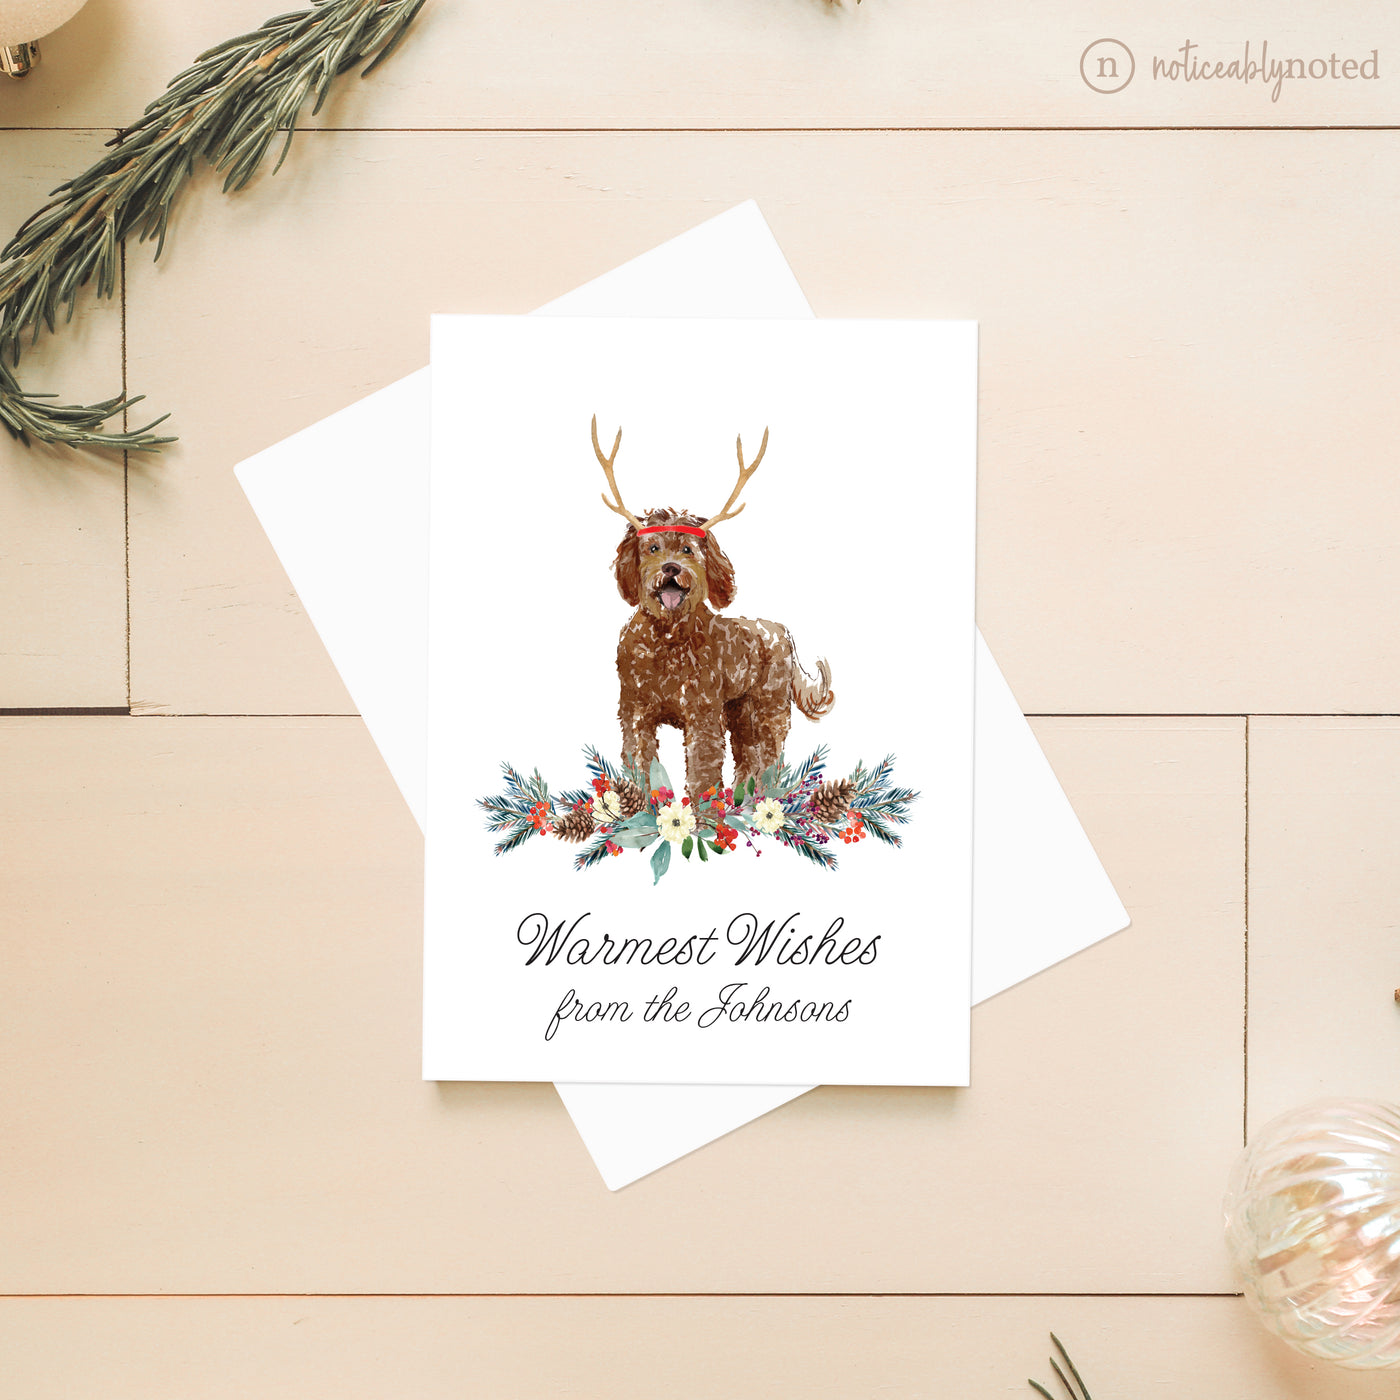 Labradoodle Dog Christmas Cards | Noticeably Noted